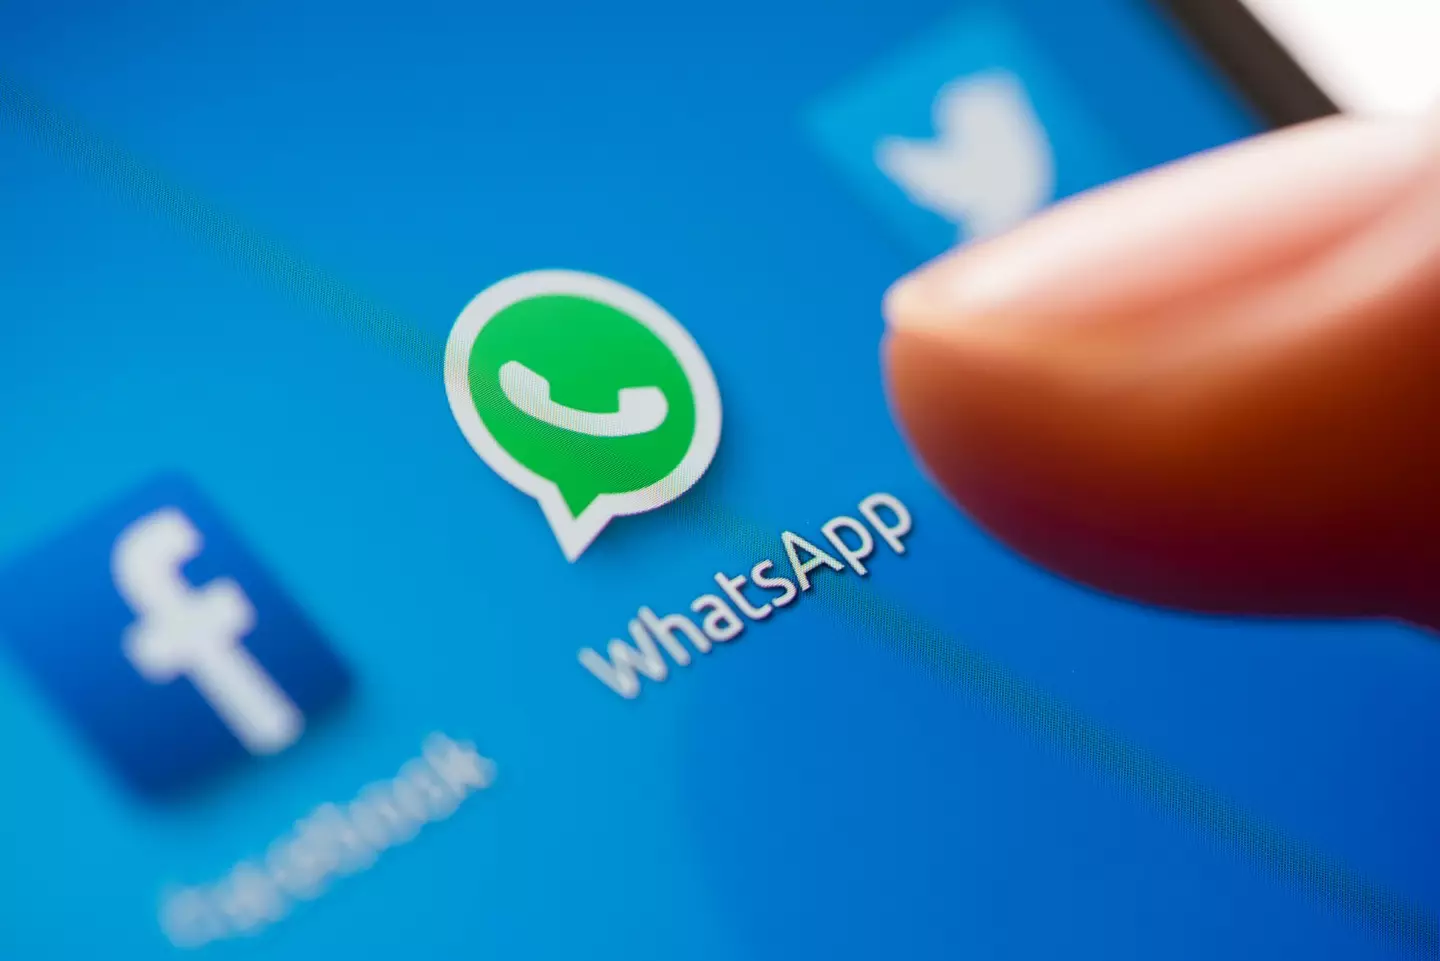 People were told to ignore message sent over WhatsApp earlier this year.